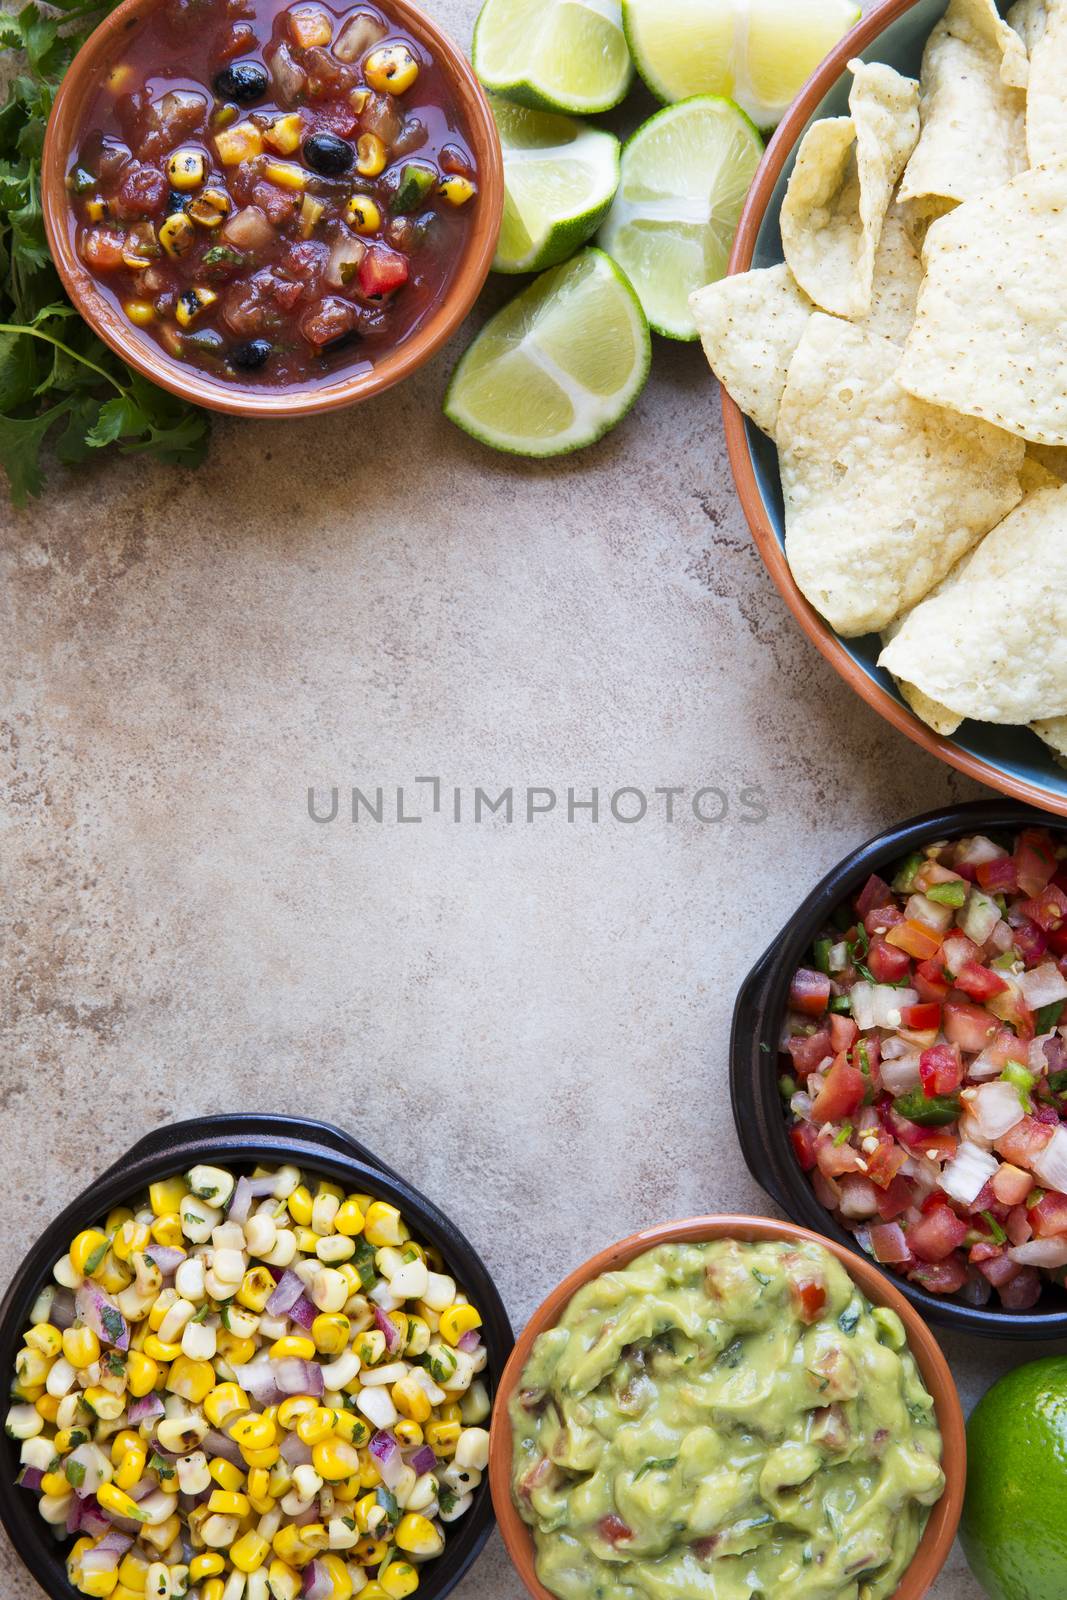 Tortilla chips served with guacamole, salsa, and pico de gallo with copy space, view from above.